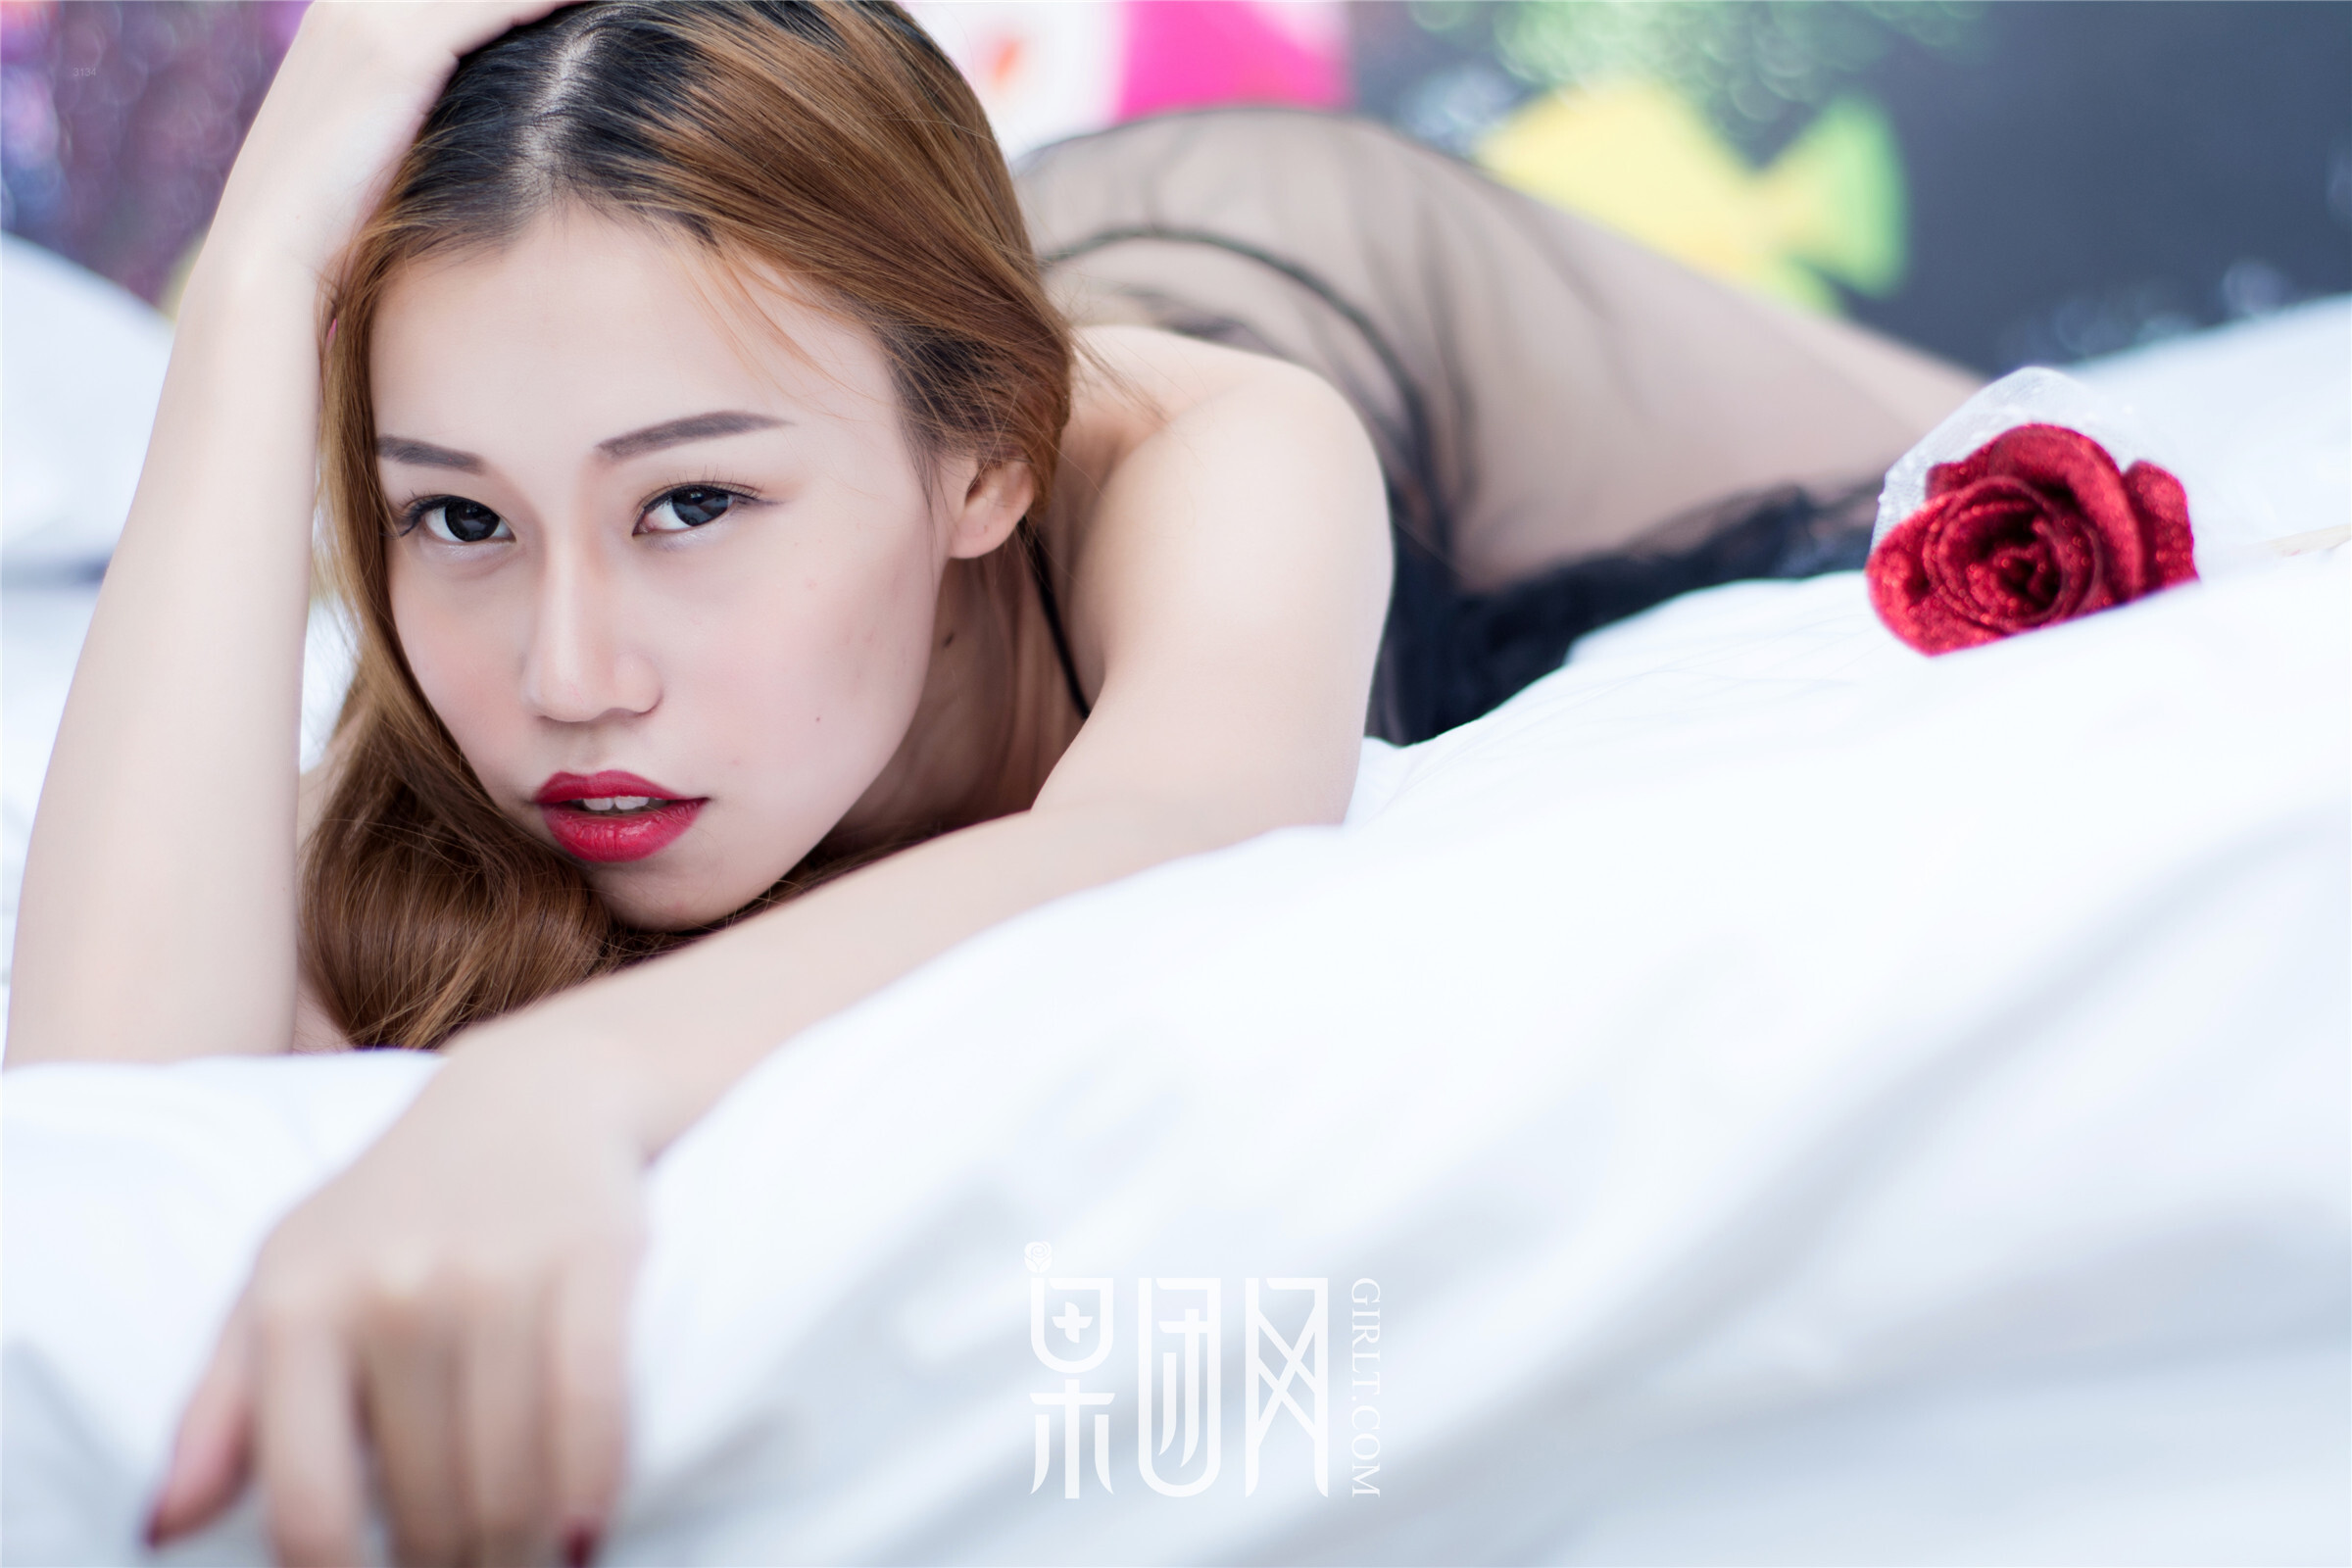 [girl guotuan.com] March 25, 2018 submission work tg.037 rose girl naked photo